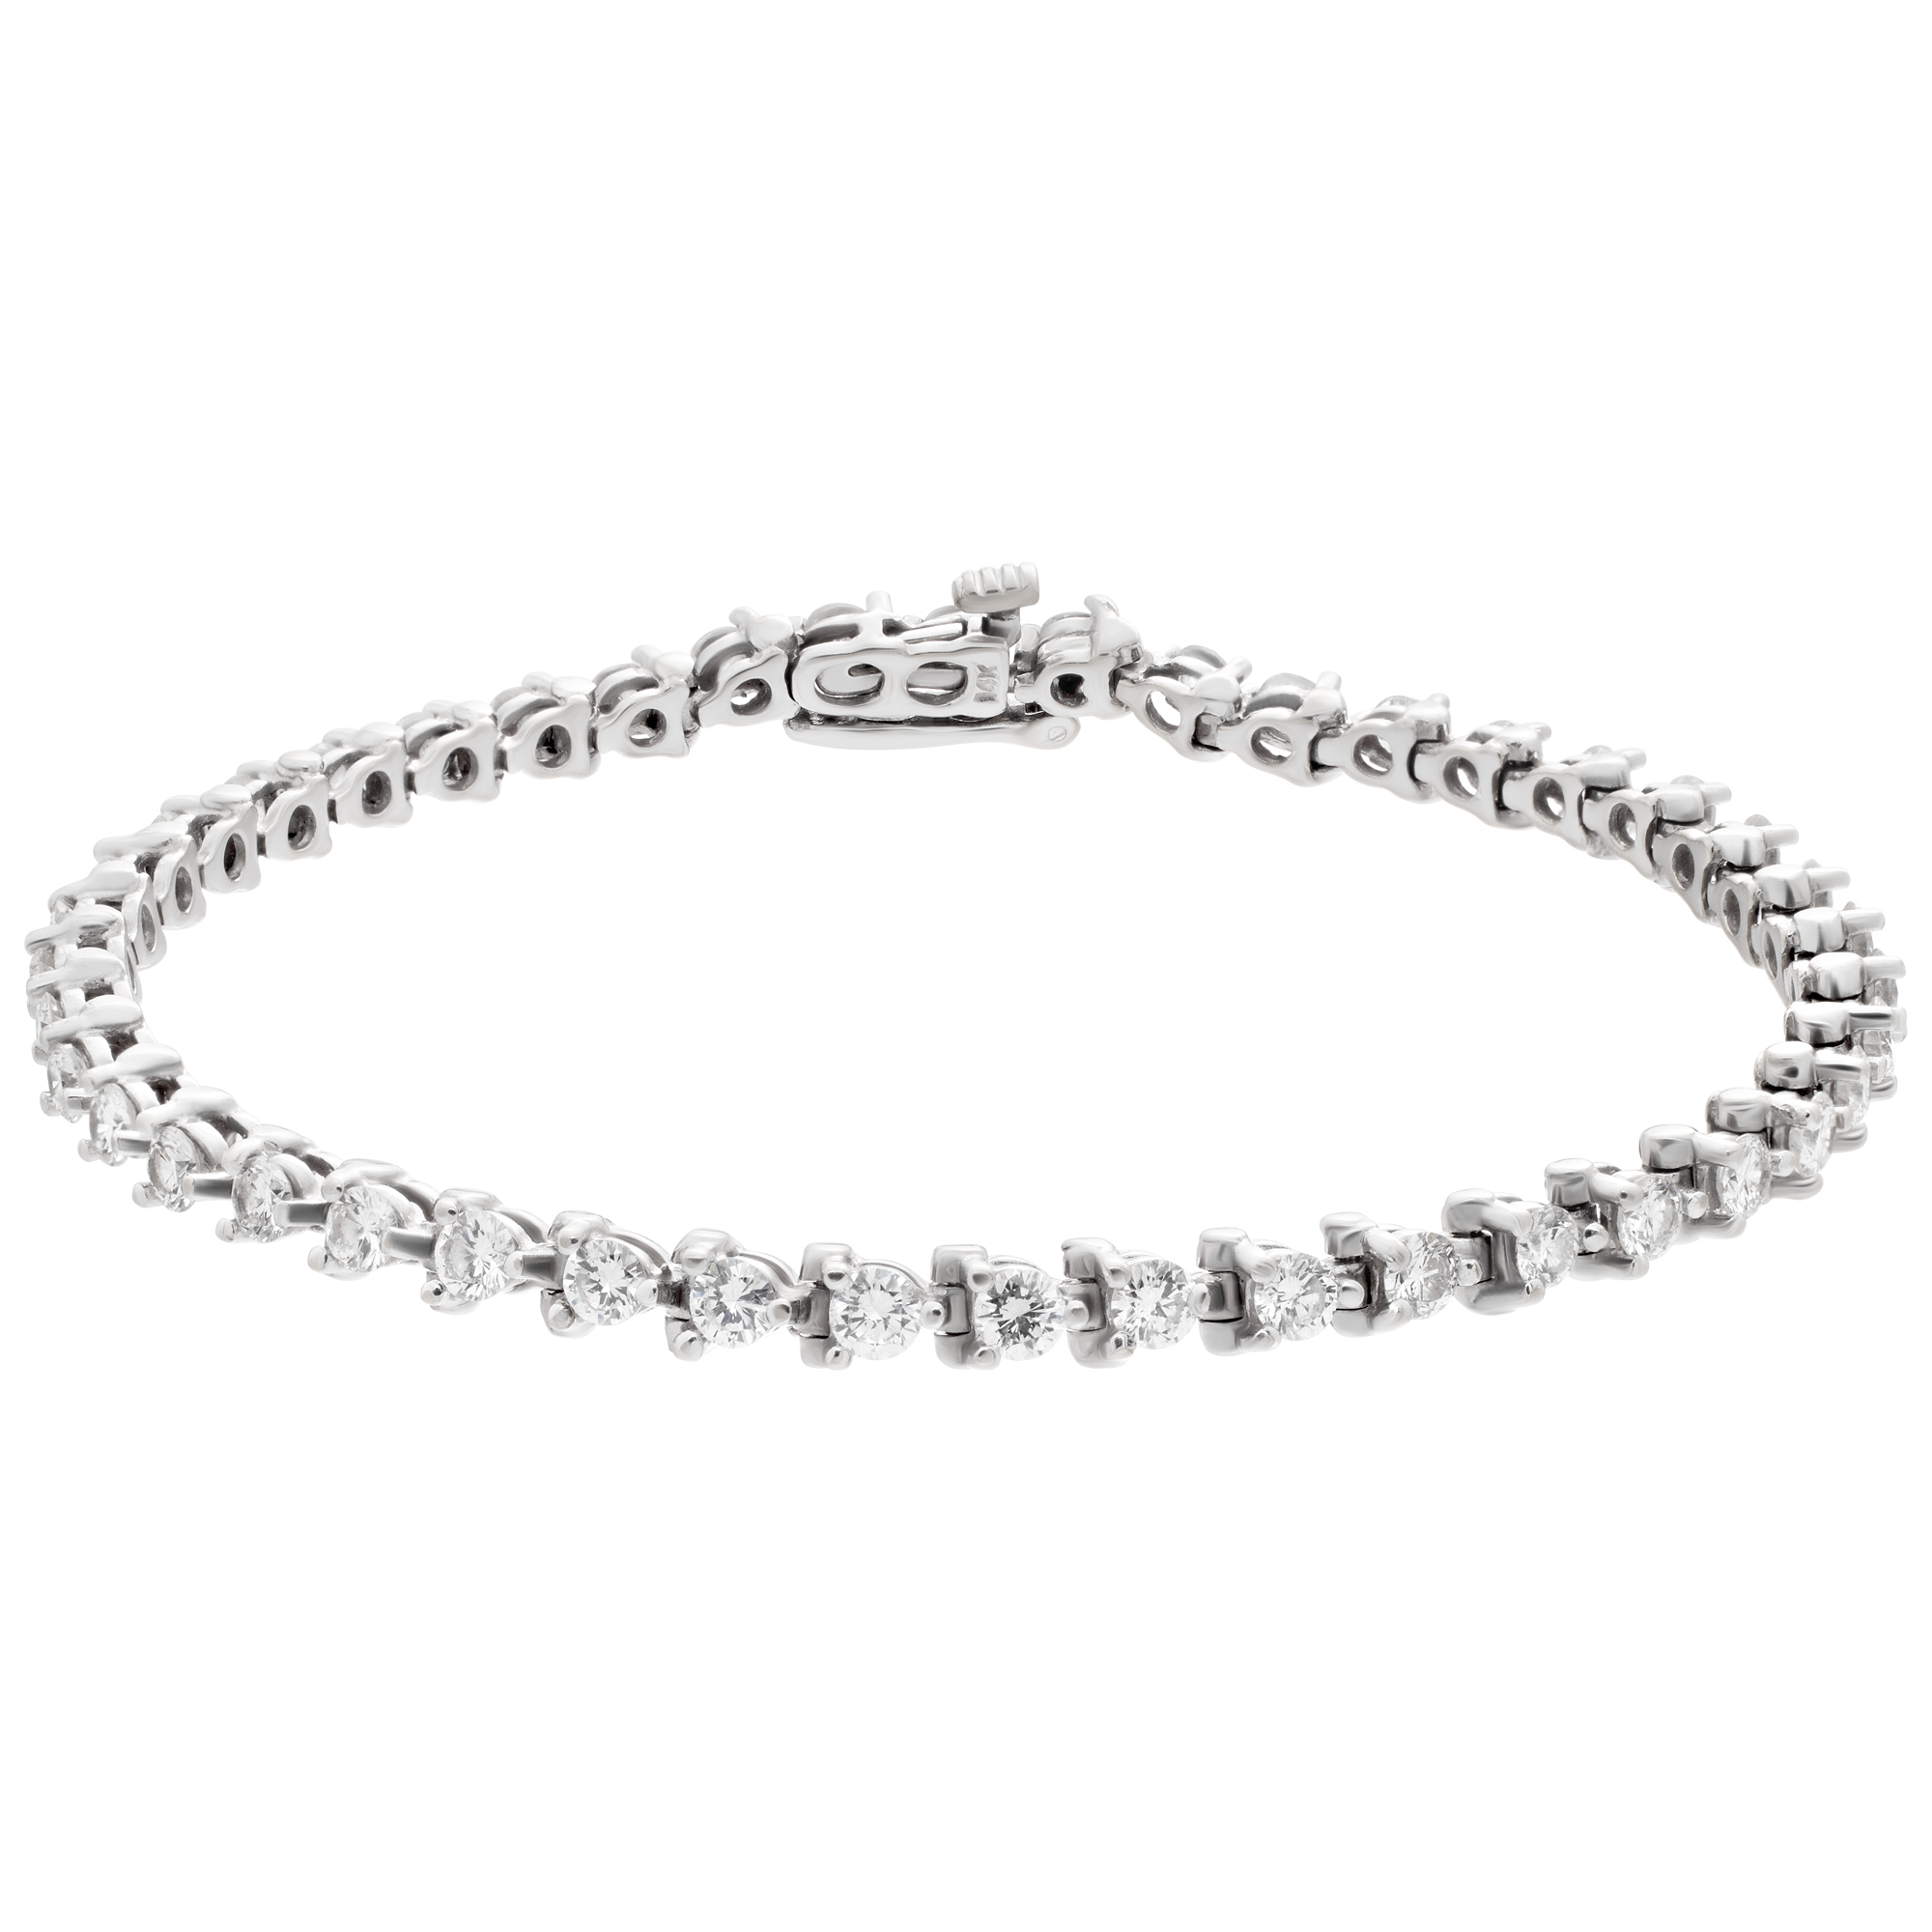 Diamond tennis bracelet with 3 carats in G-H color, VS-SI clarity in 14k white gold